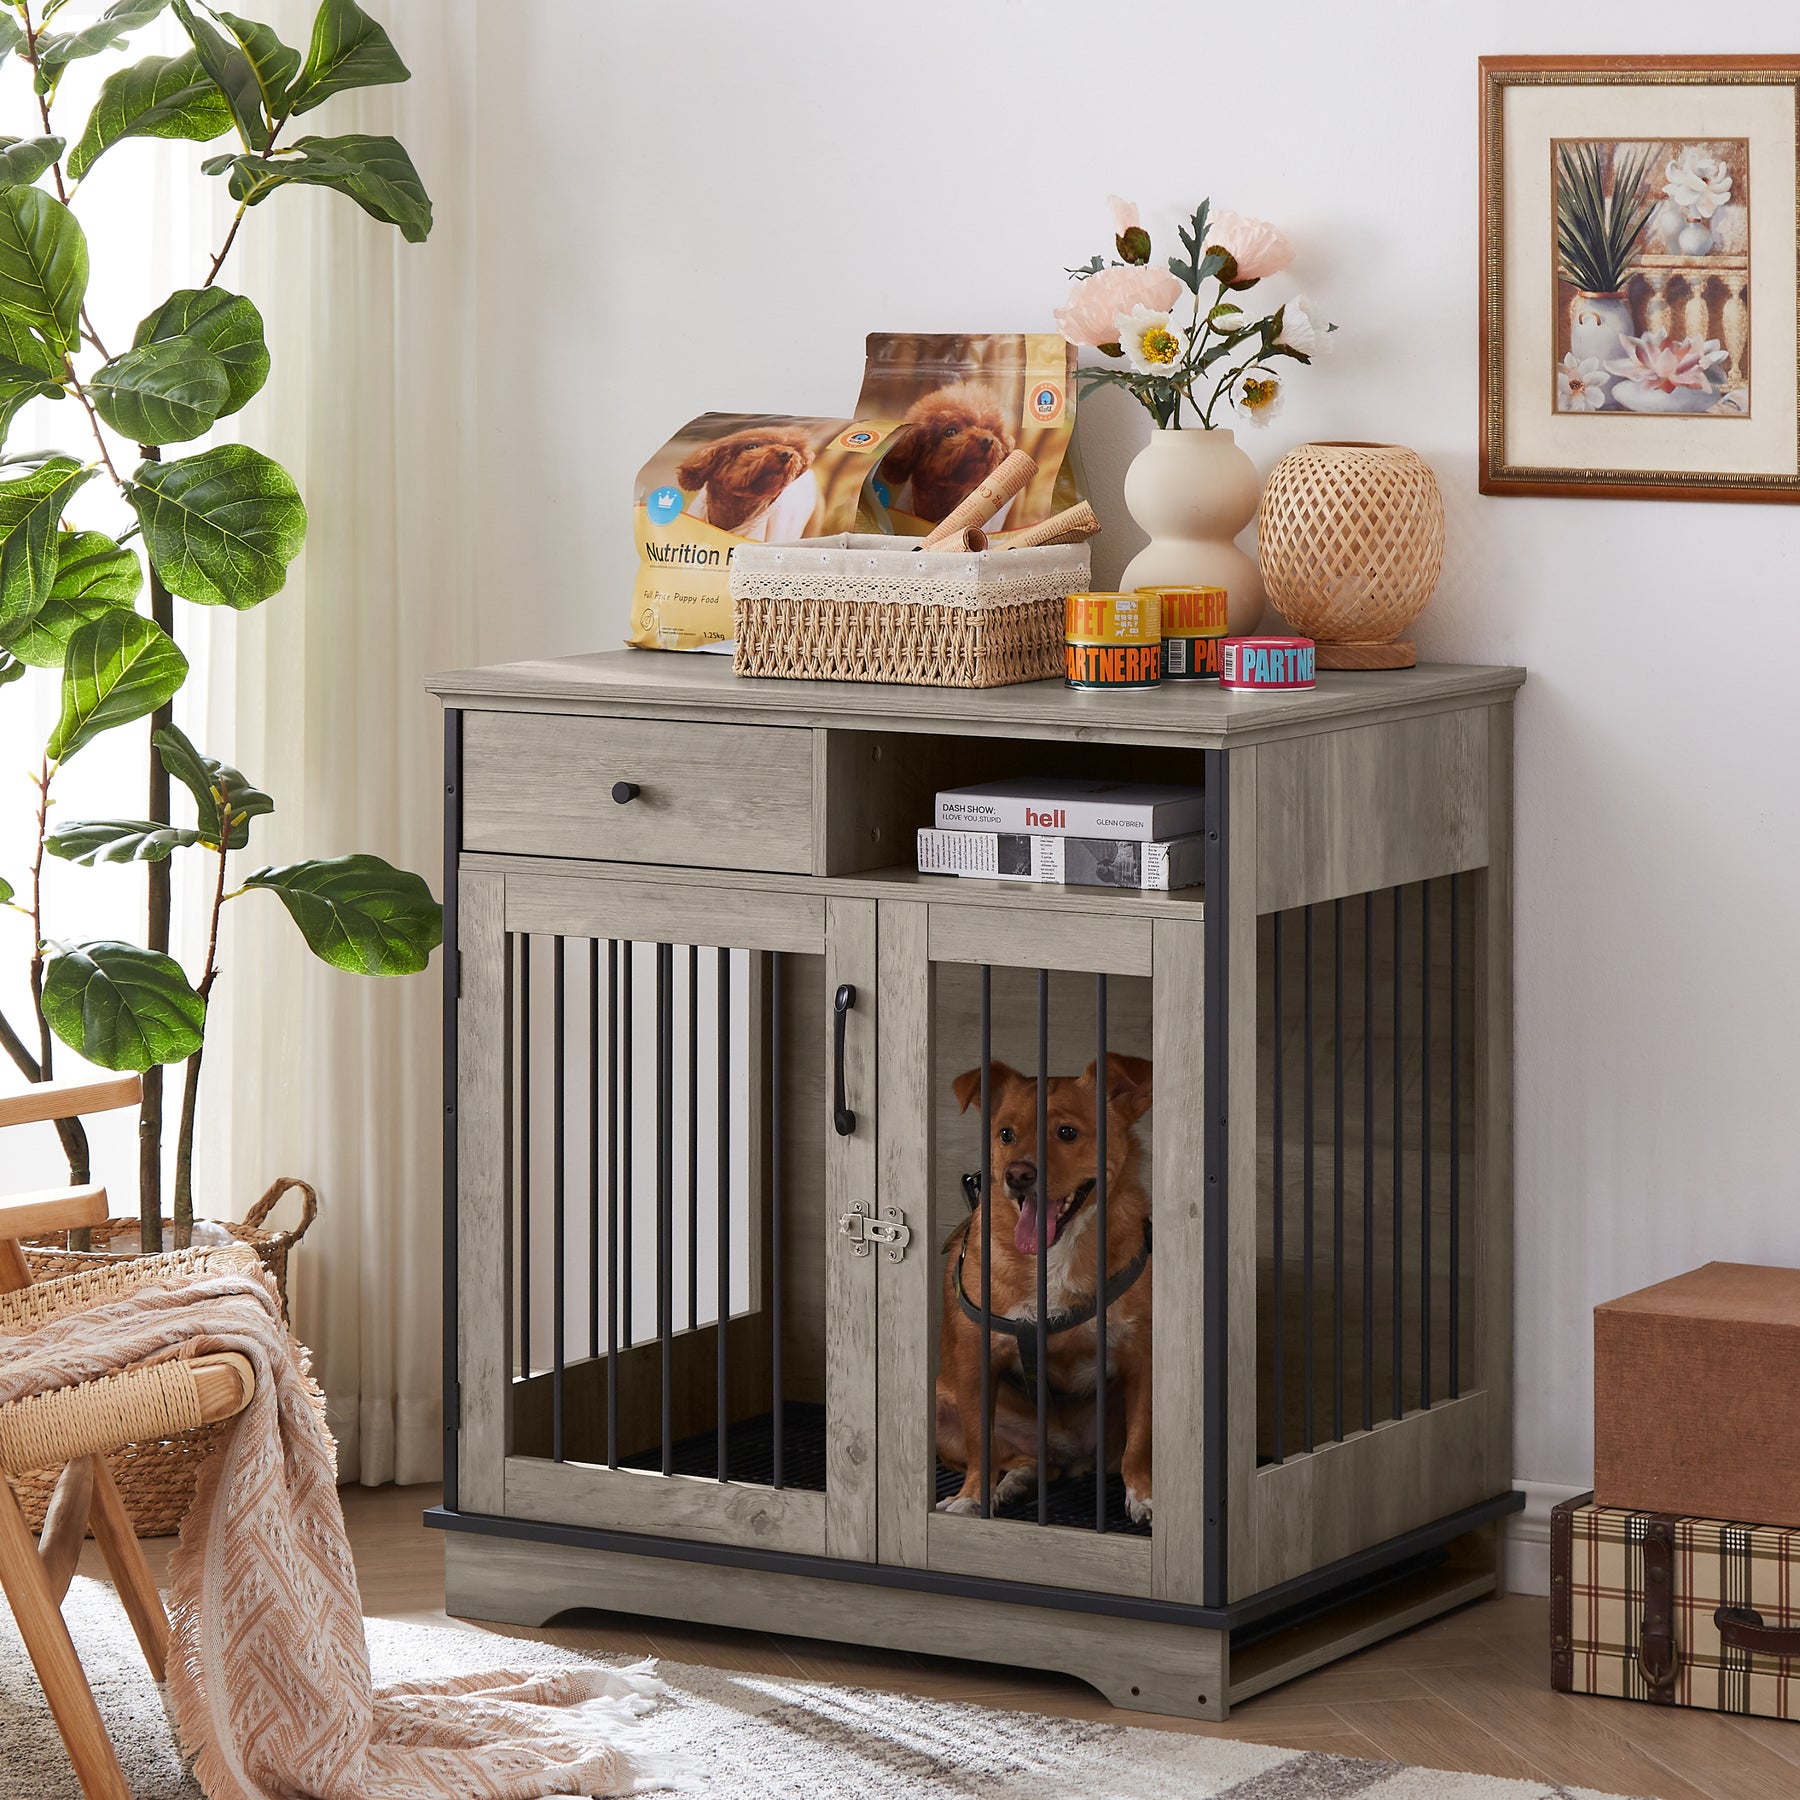 Furniture Dog crate, indoor pet crate end tables, decorative wooden kennels with removable trays. Grey, 32.3'' W x 22.8'' D x 33.5'' H. - Tonkn